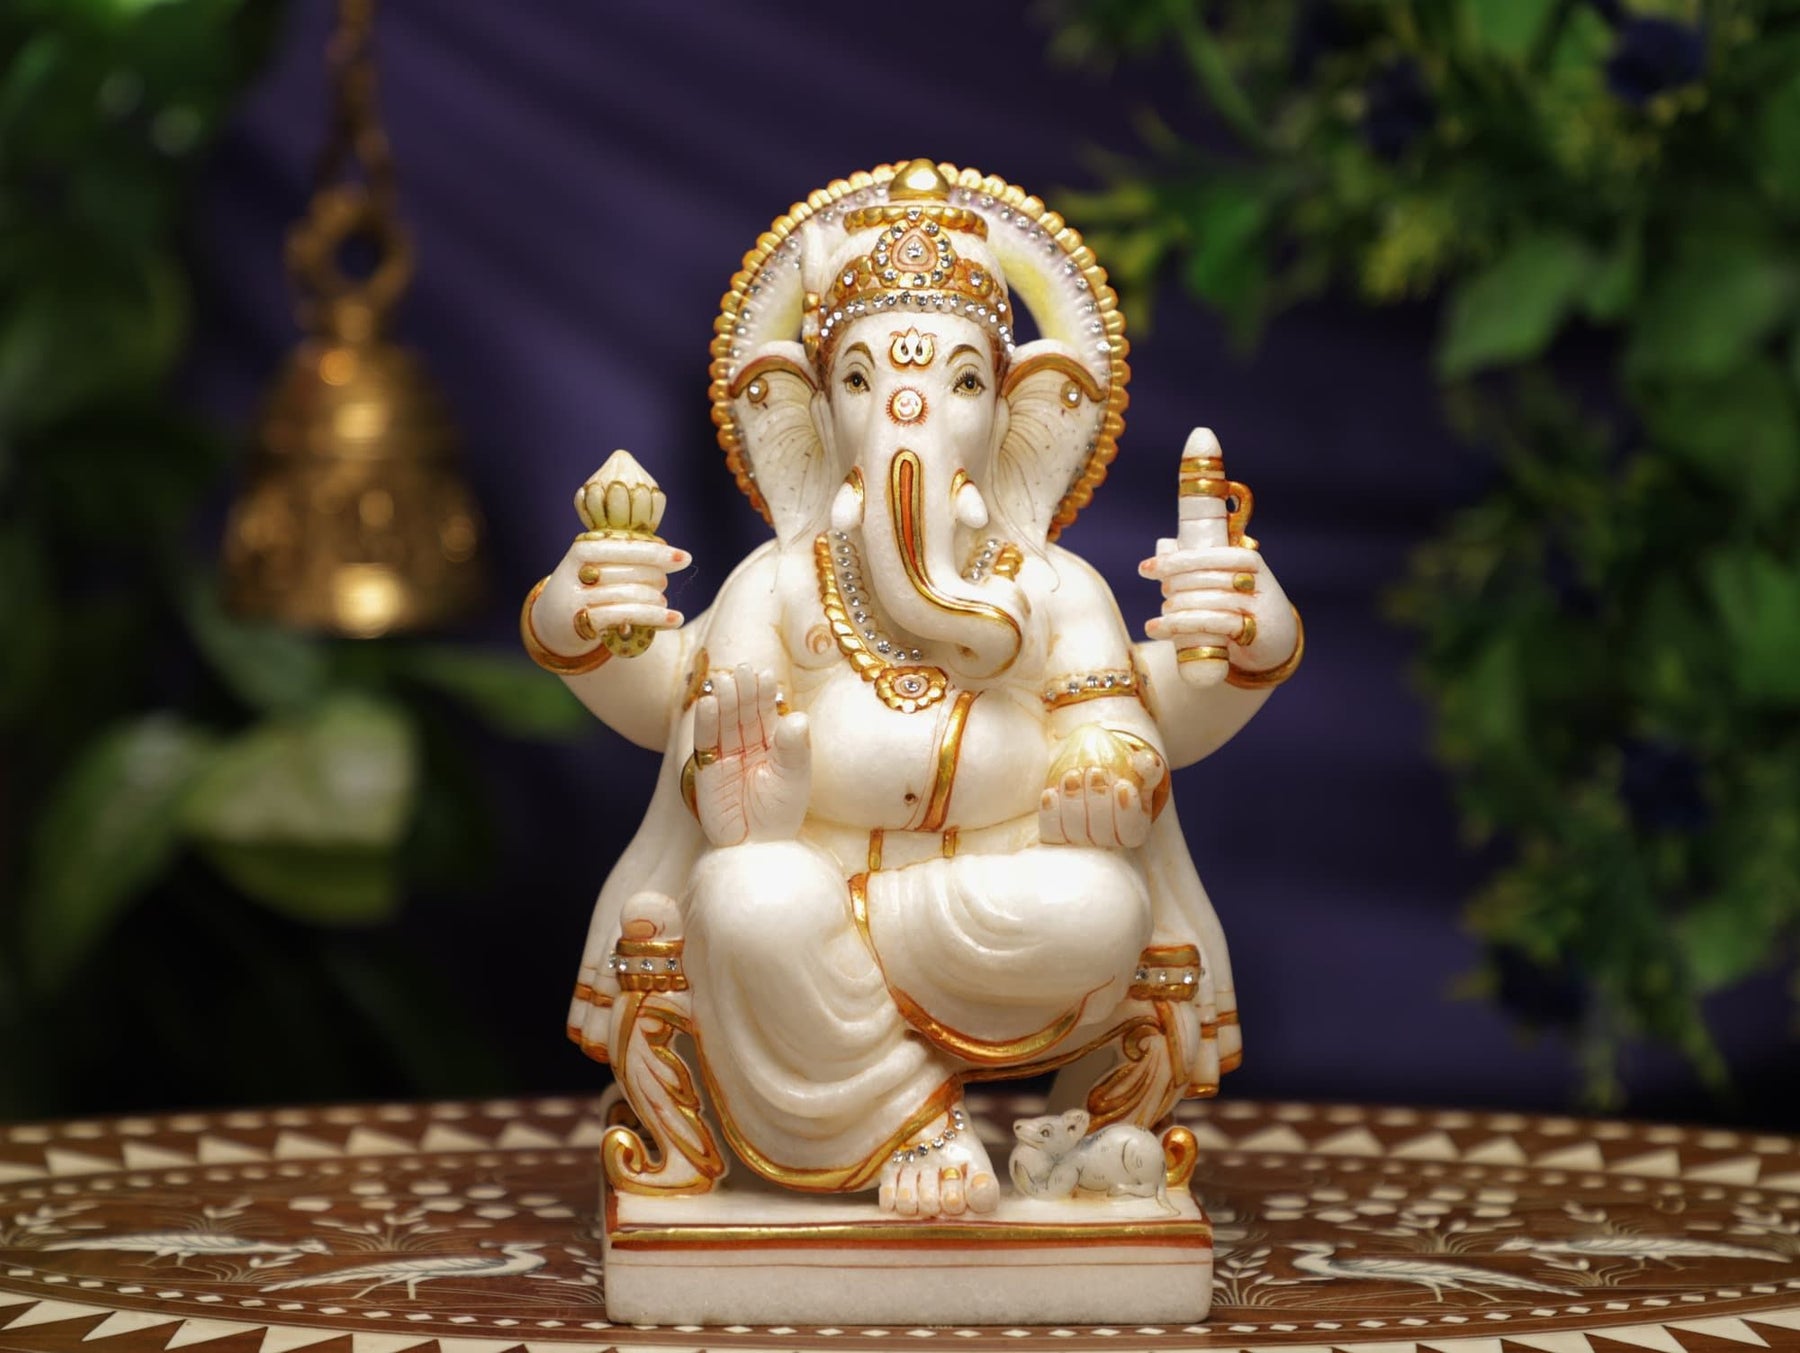 Is Marble Ganesh Murti good for home?